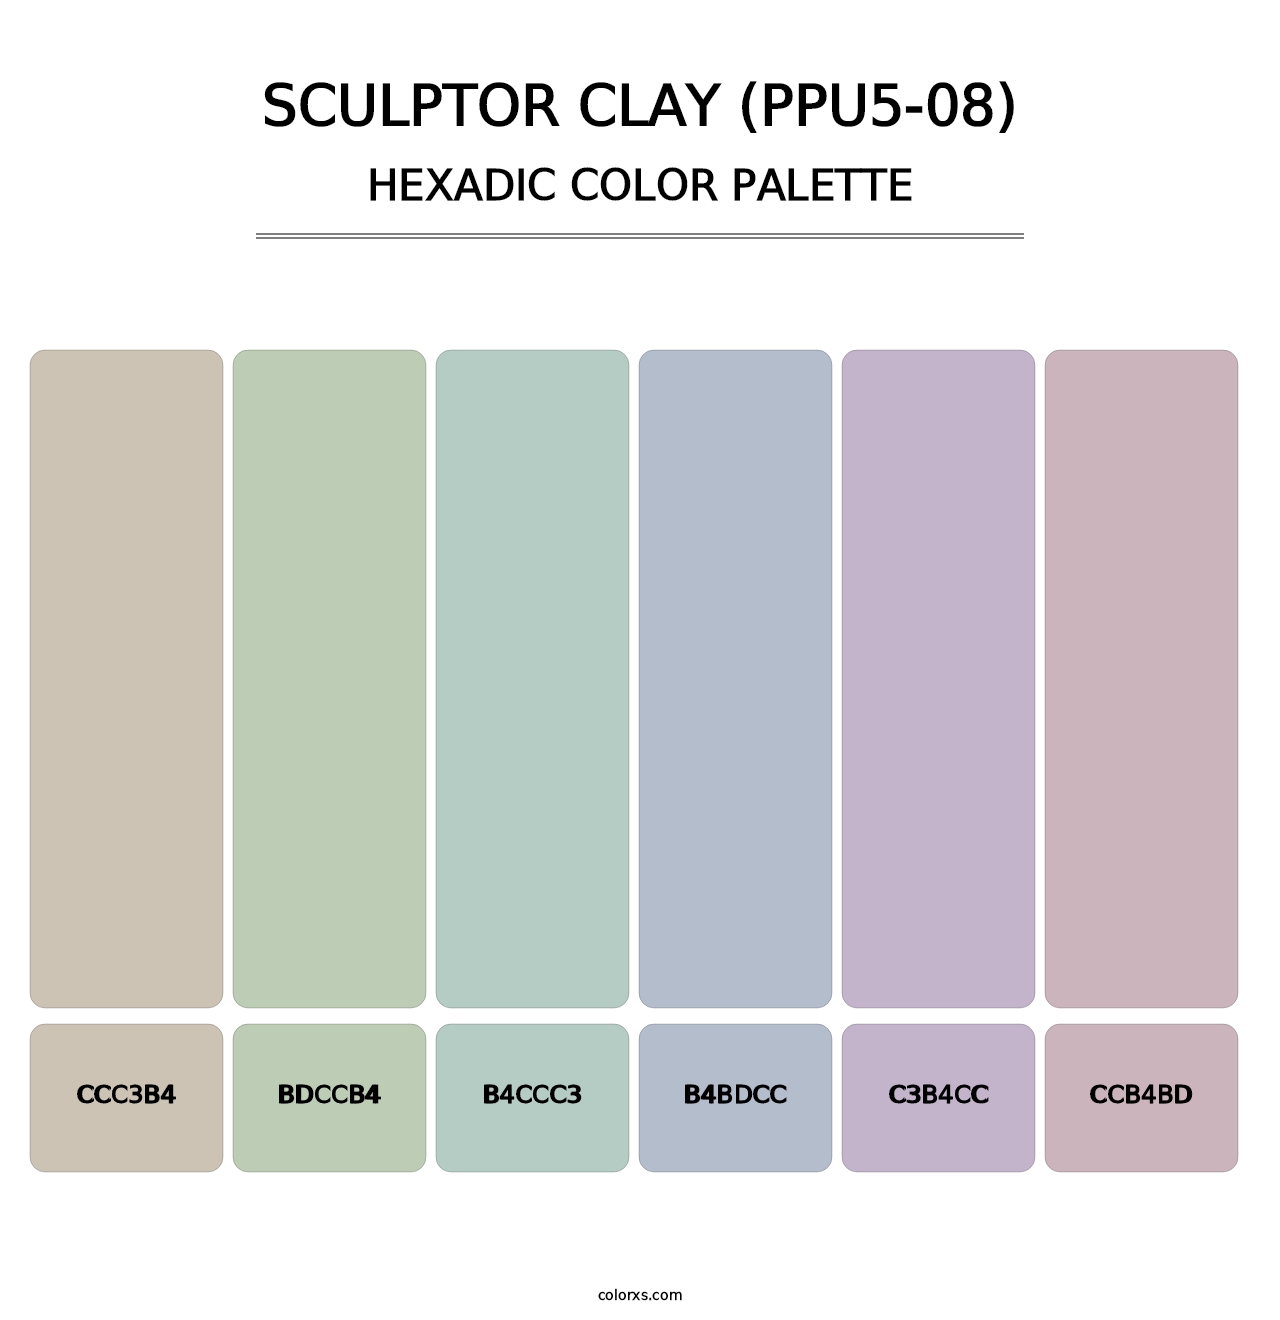 Sculptor Clay (PPU5-08) - Hexadic Color Palette